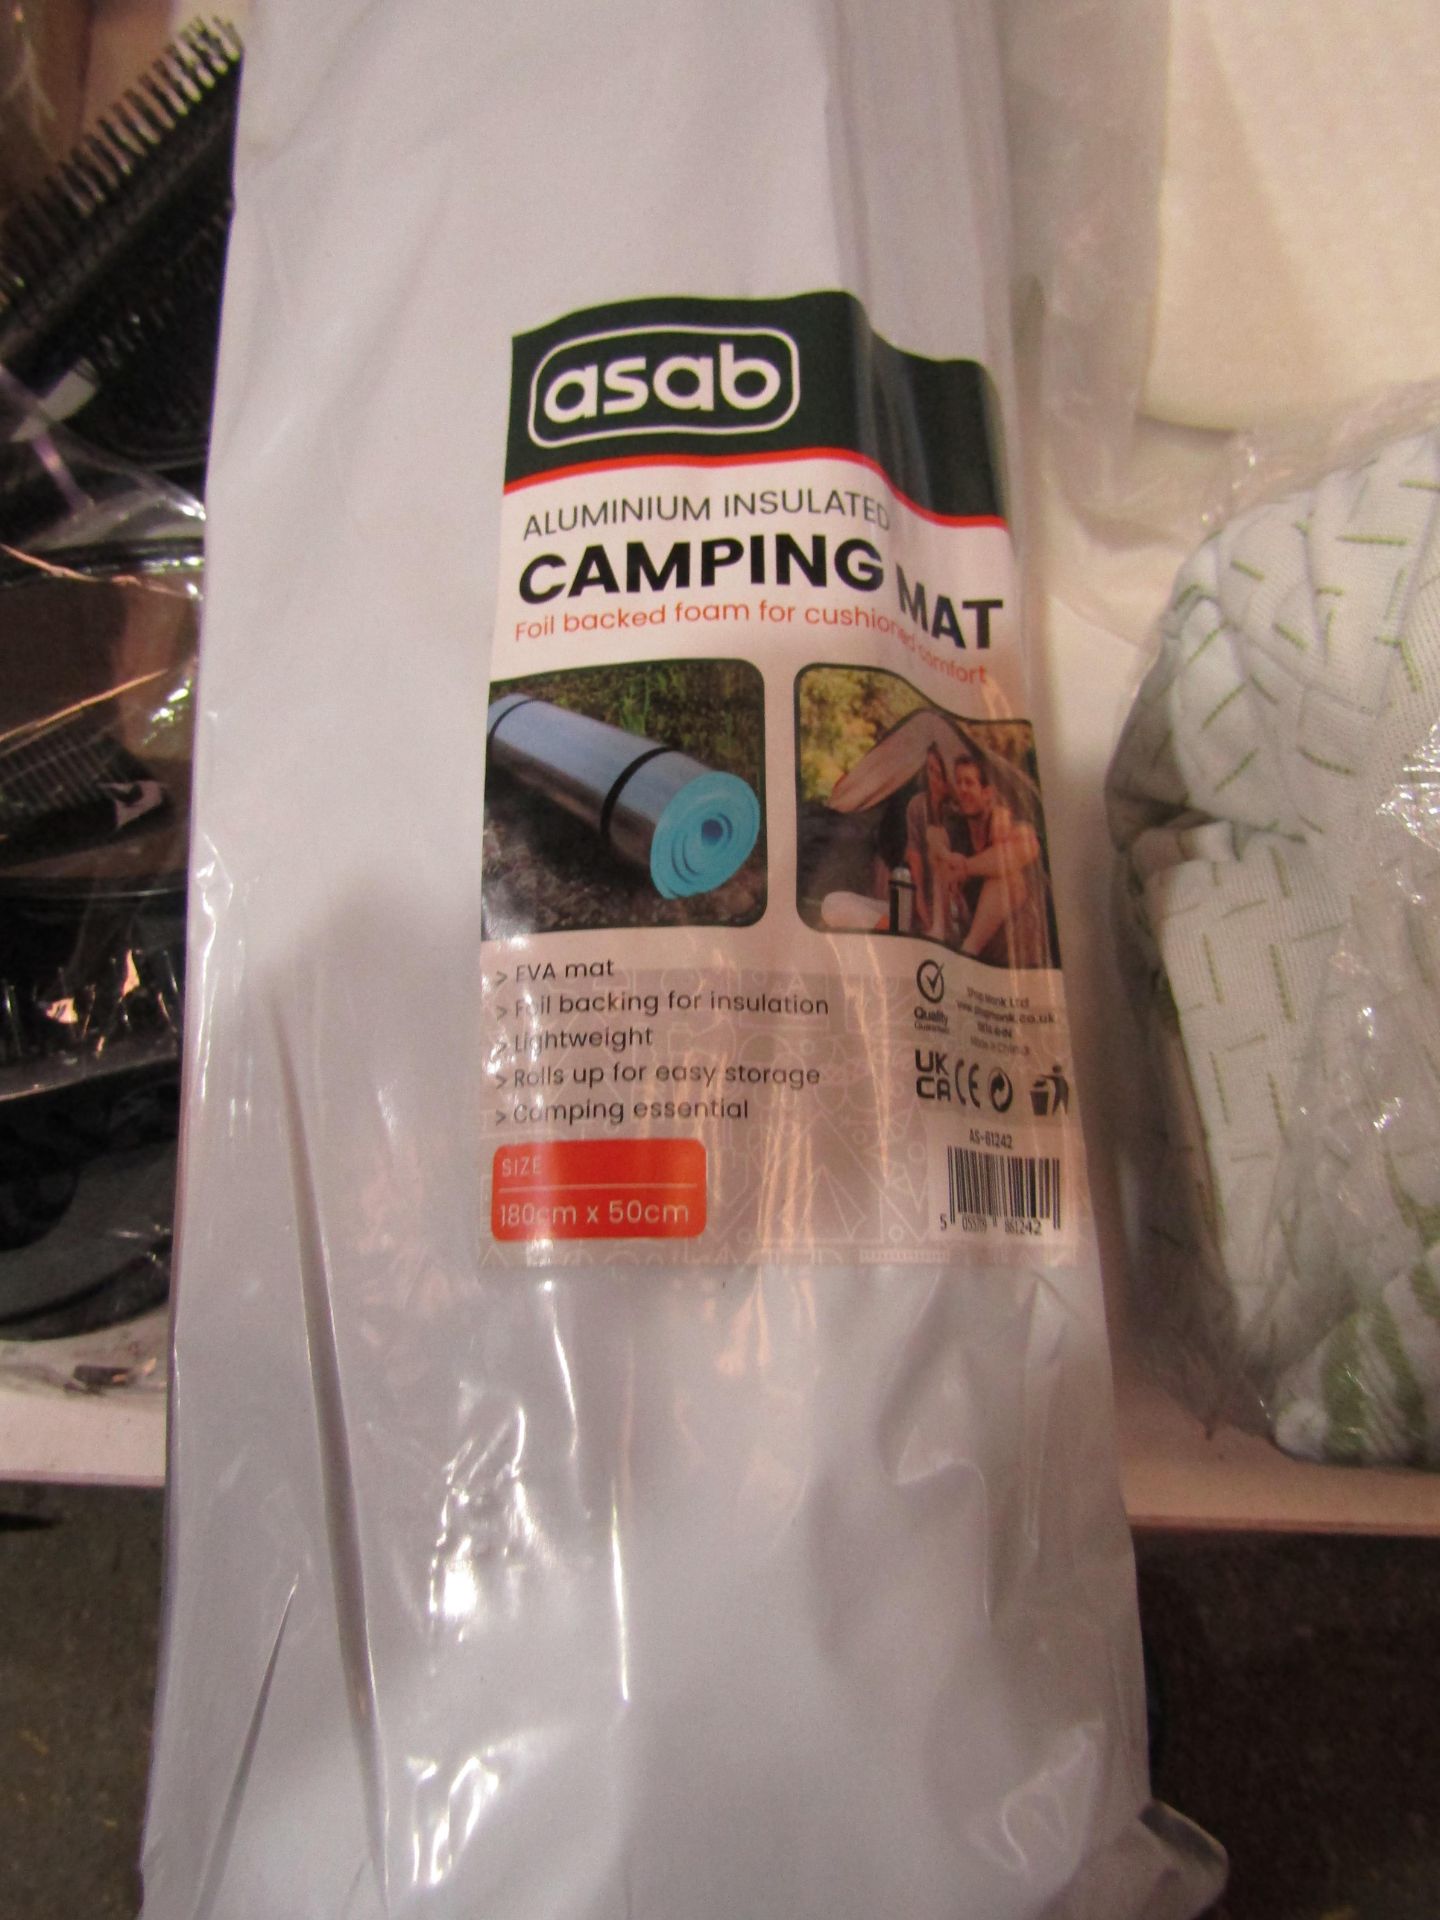 Asab Aluminium Insulated Camping Mat, Size: 180 x 50cm - Unchecked & Packaged.